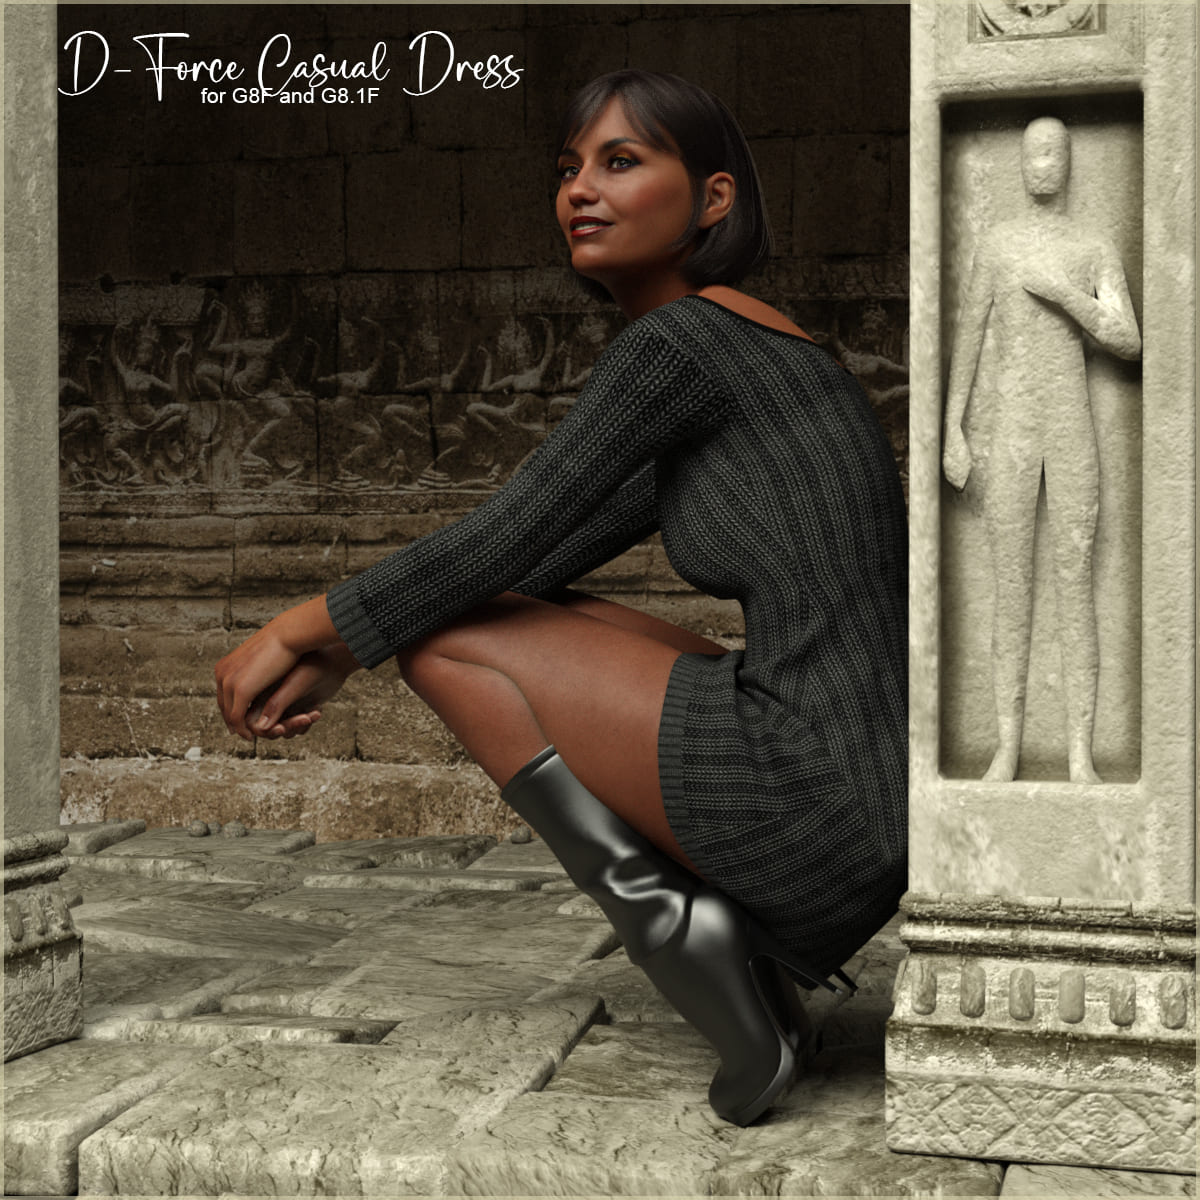 D-Force Casual Dress for G8F & G8.1F_DAZ3DDL